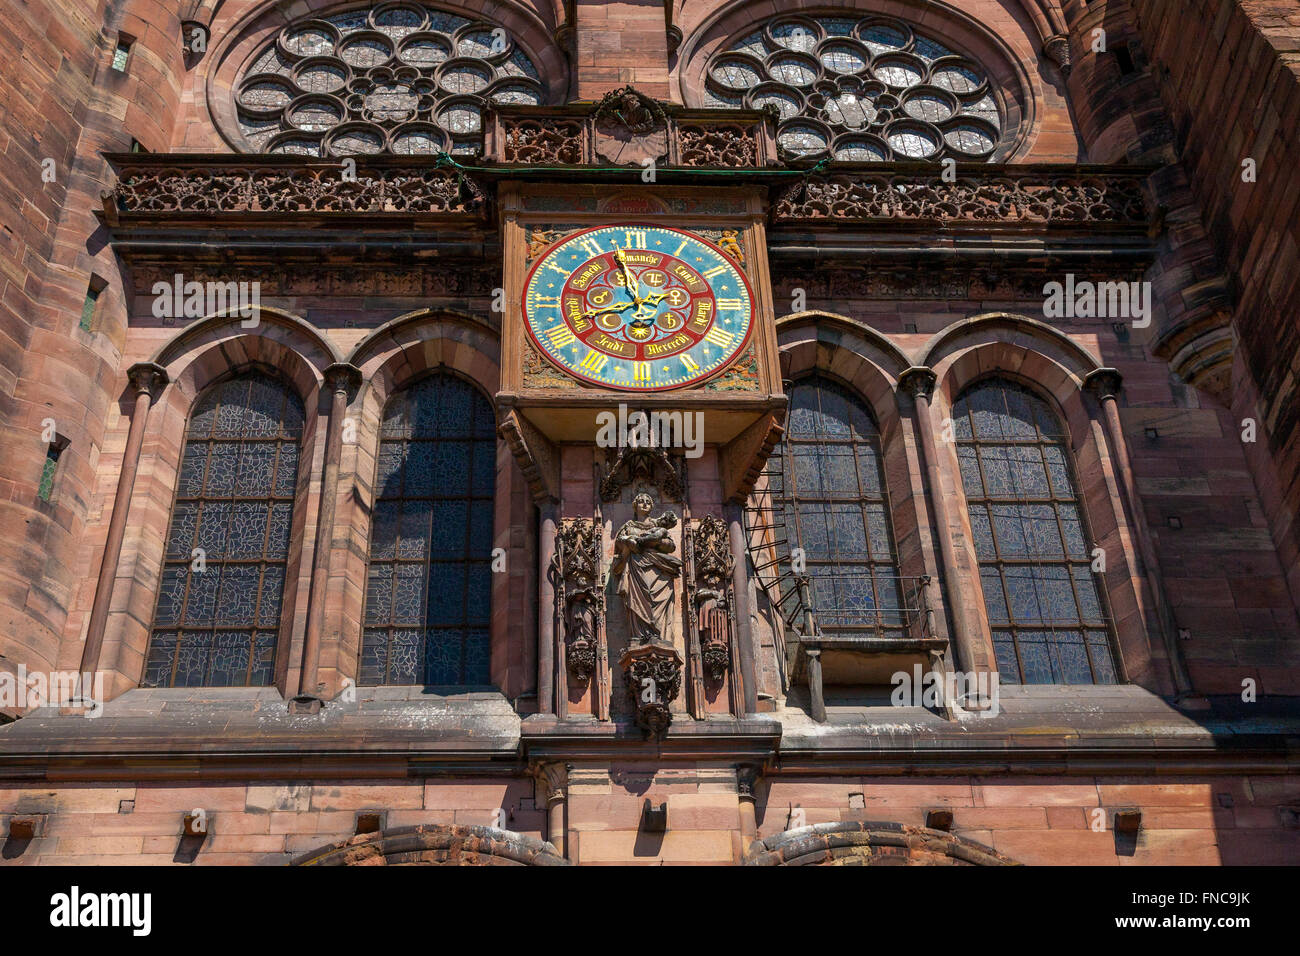 Astronomic clock, Cathedral Our Lady, Strasbourg Alsace France Stock Photo